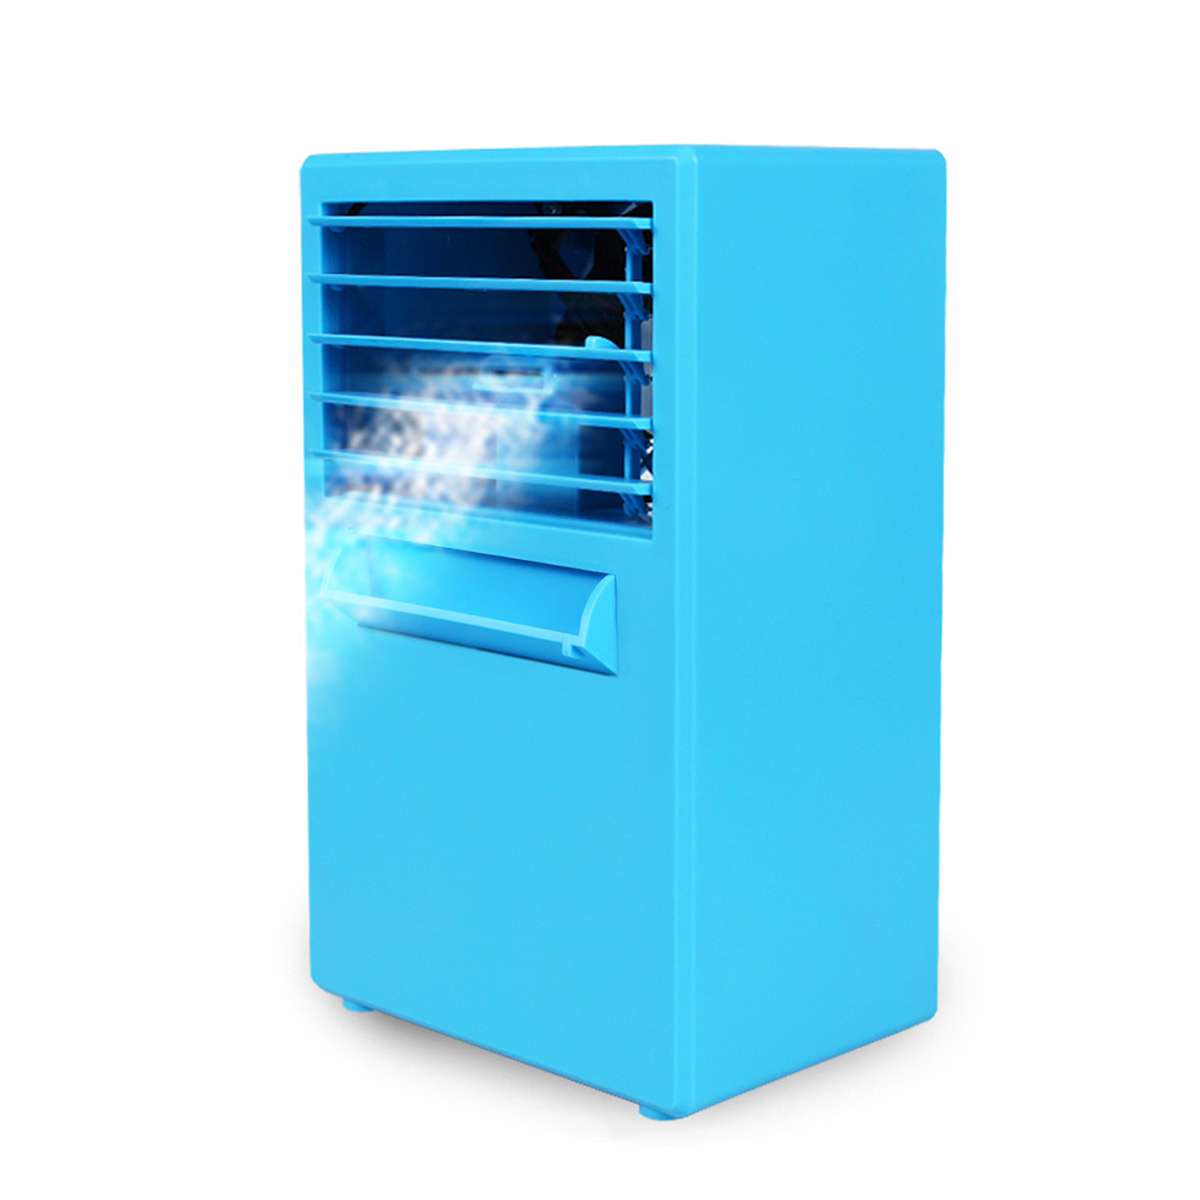 24V Portable Mini Conditioner Fan USB Air Cooler Camping Travel Summer Cooling Machine